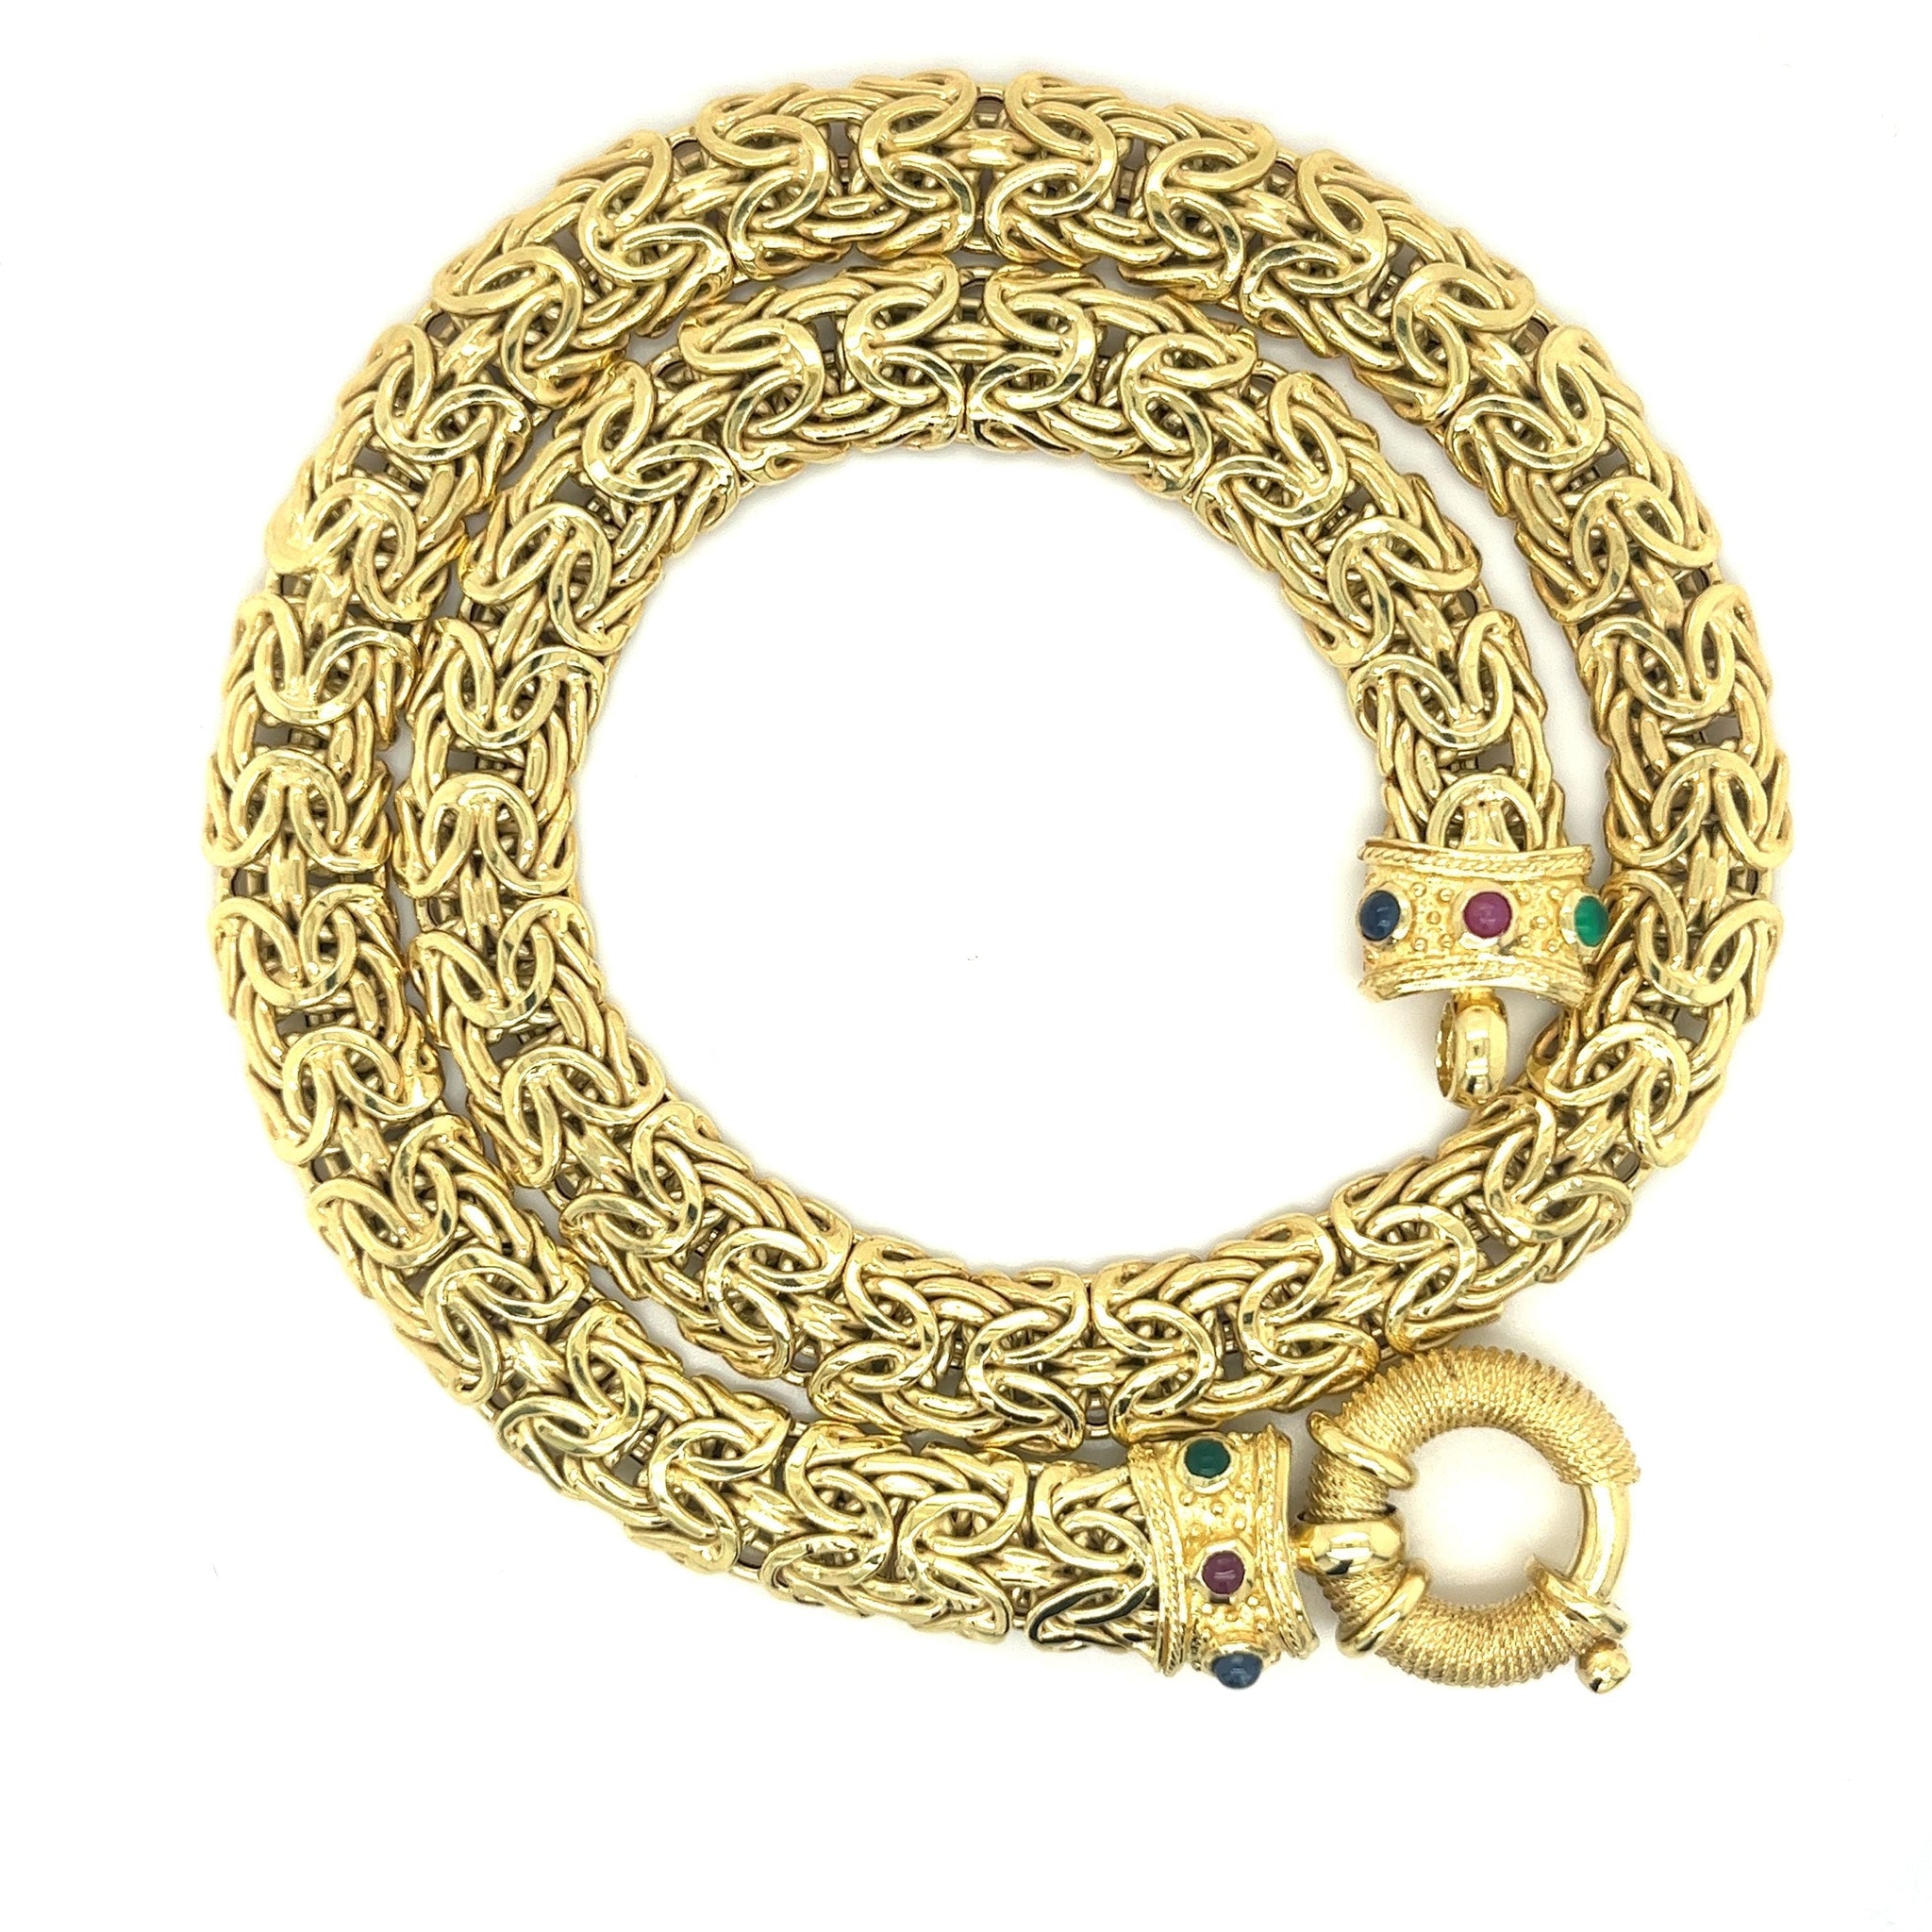 Buy Byzantine Gold Necklace Handmade Gold Chain 14K Gold Online in India -  Etsy